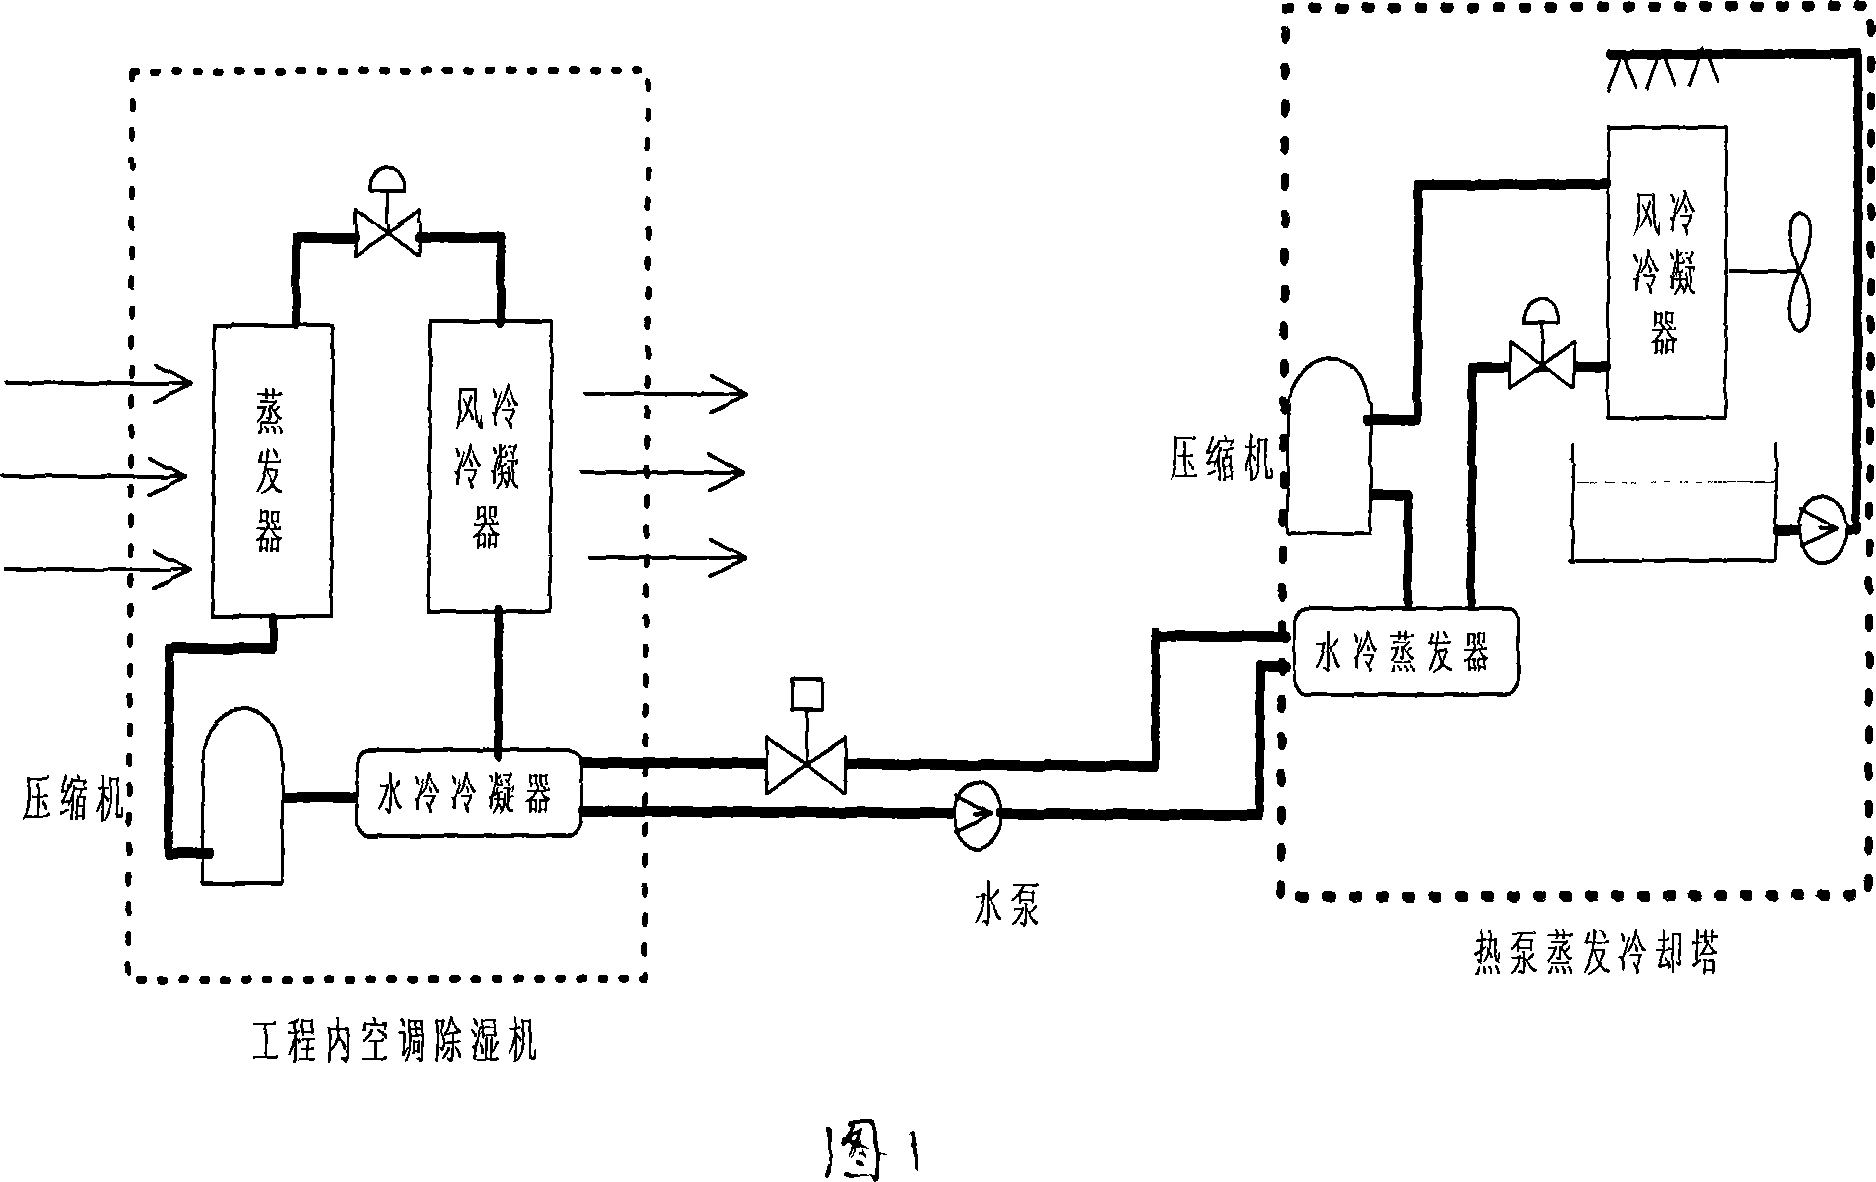 Cooling method and device for underground engineering